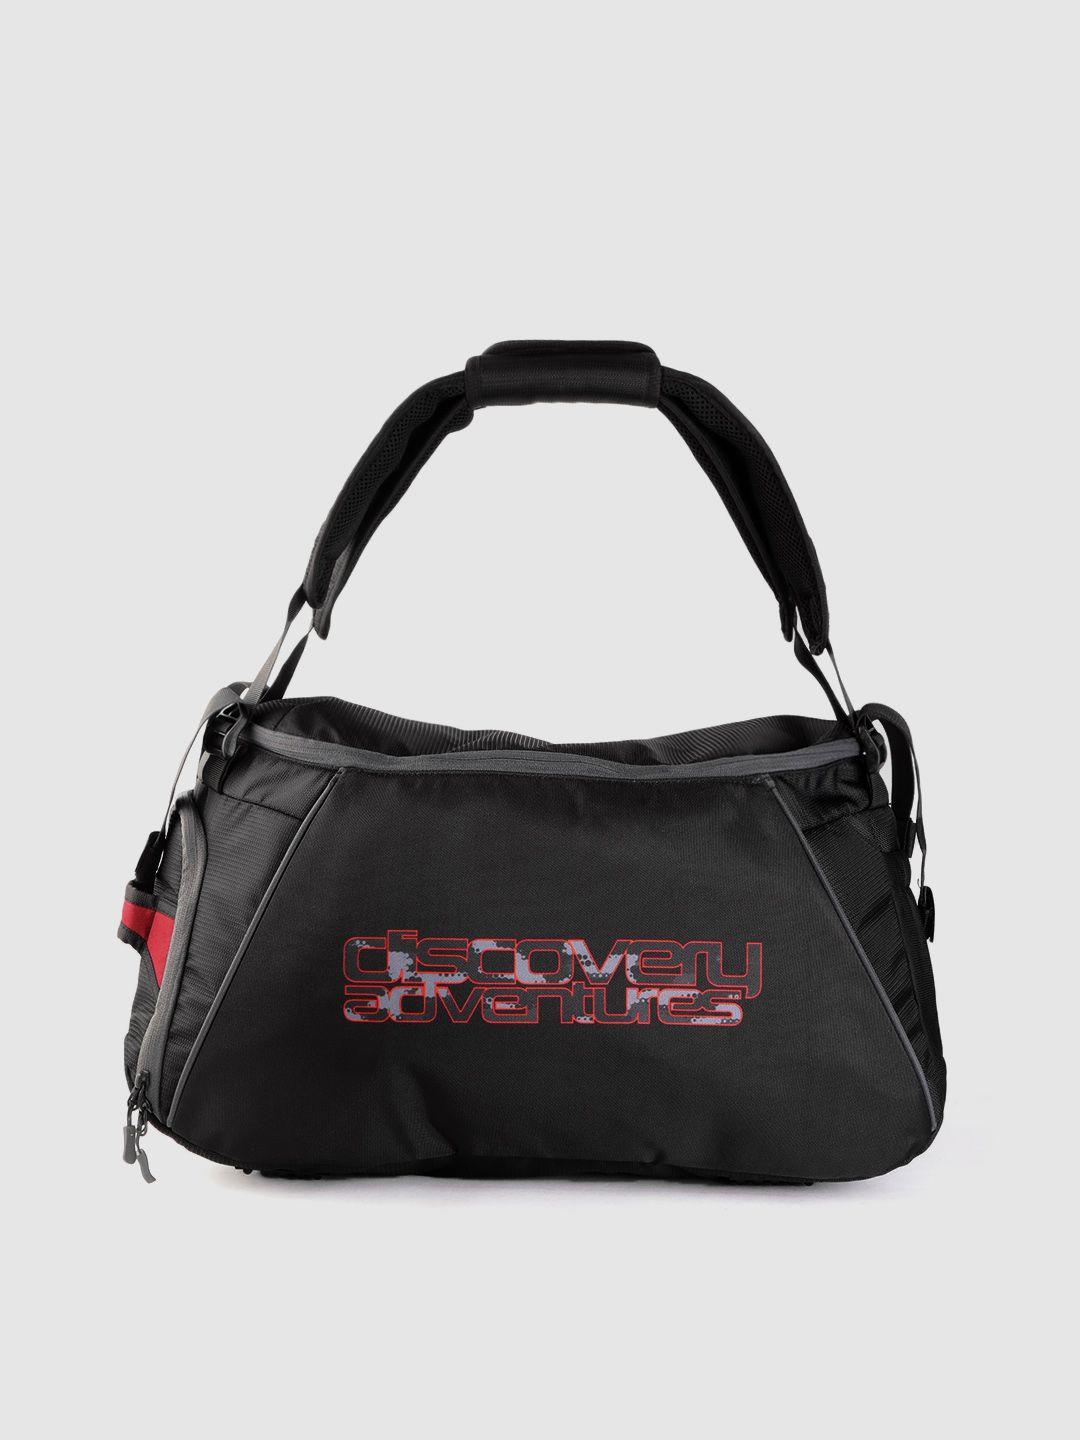 the roadster lifestyle co x discovery adventures unisex black & red brand logo print duffel bag